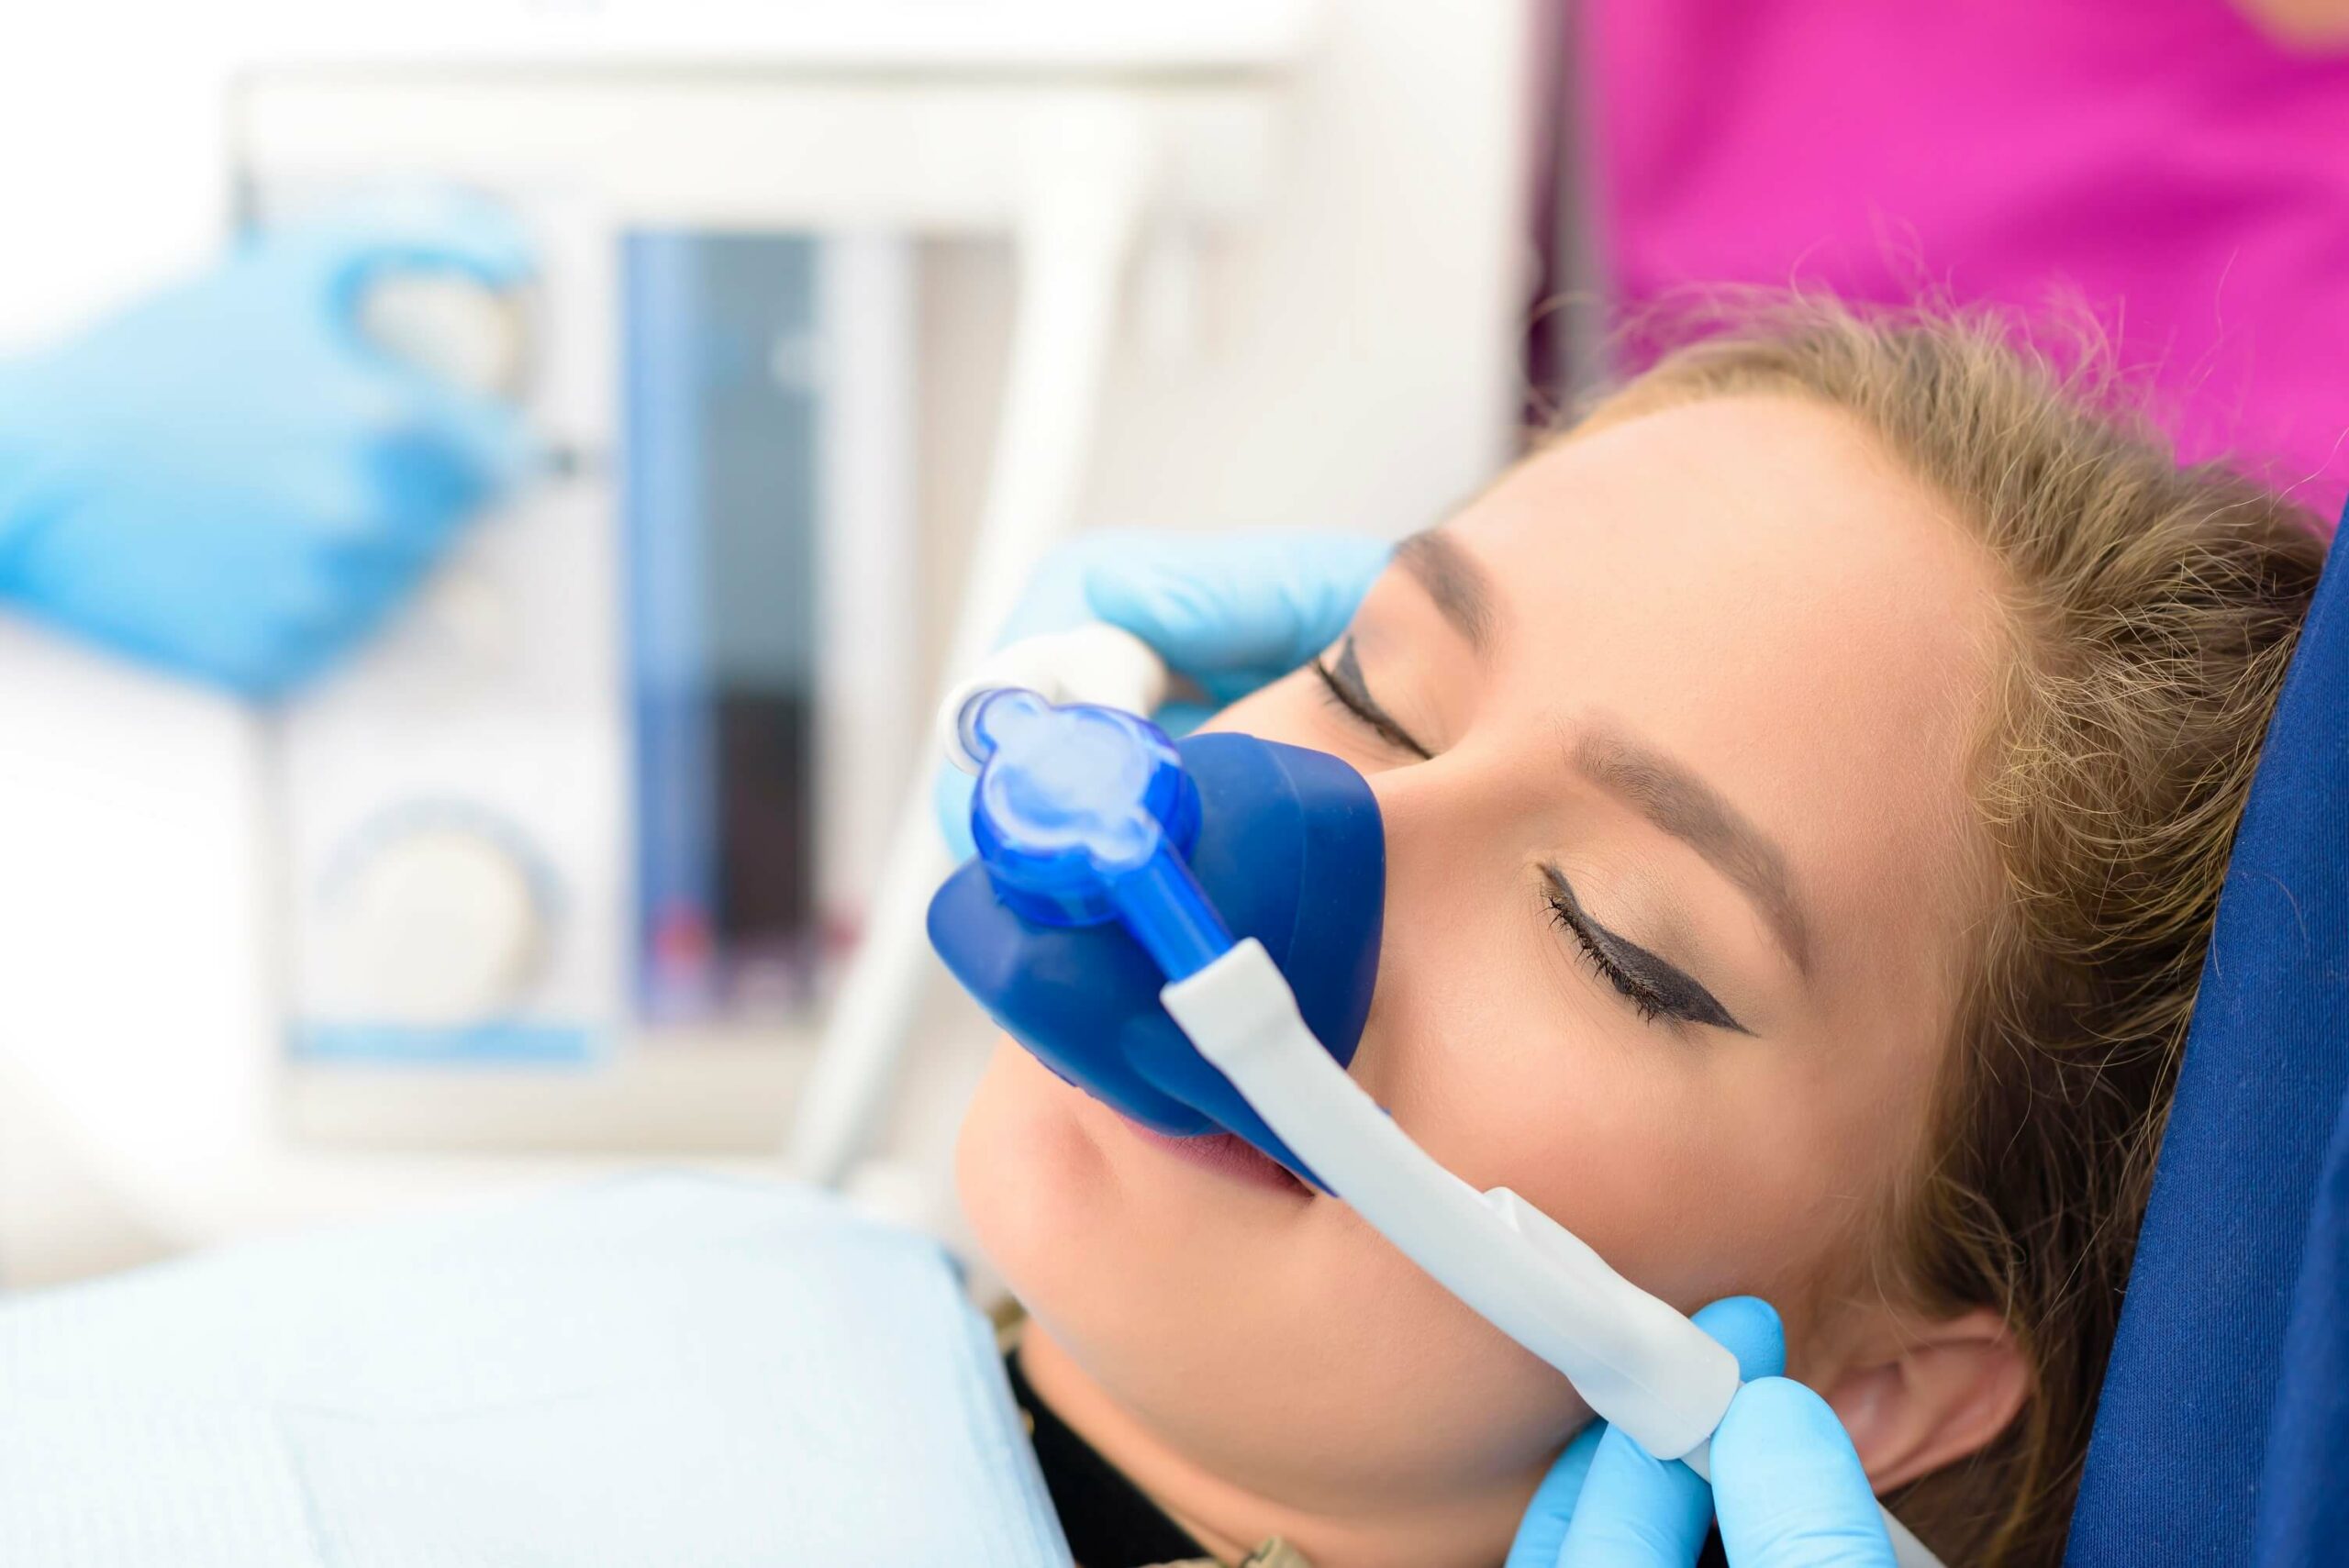 Featured image for “Can Sedation Help with Dental Anxiety?”